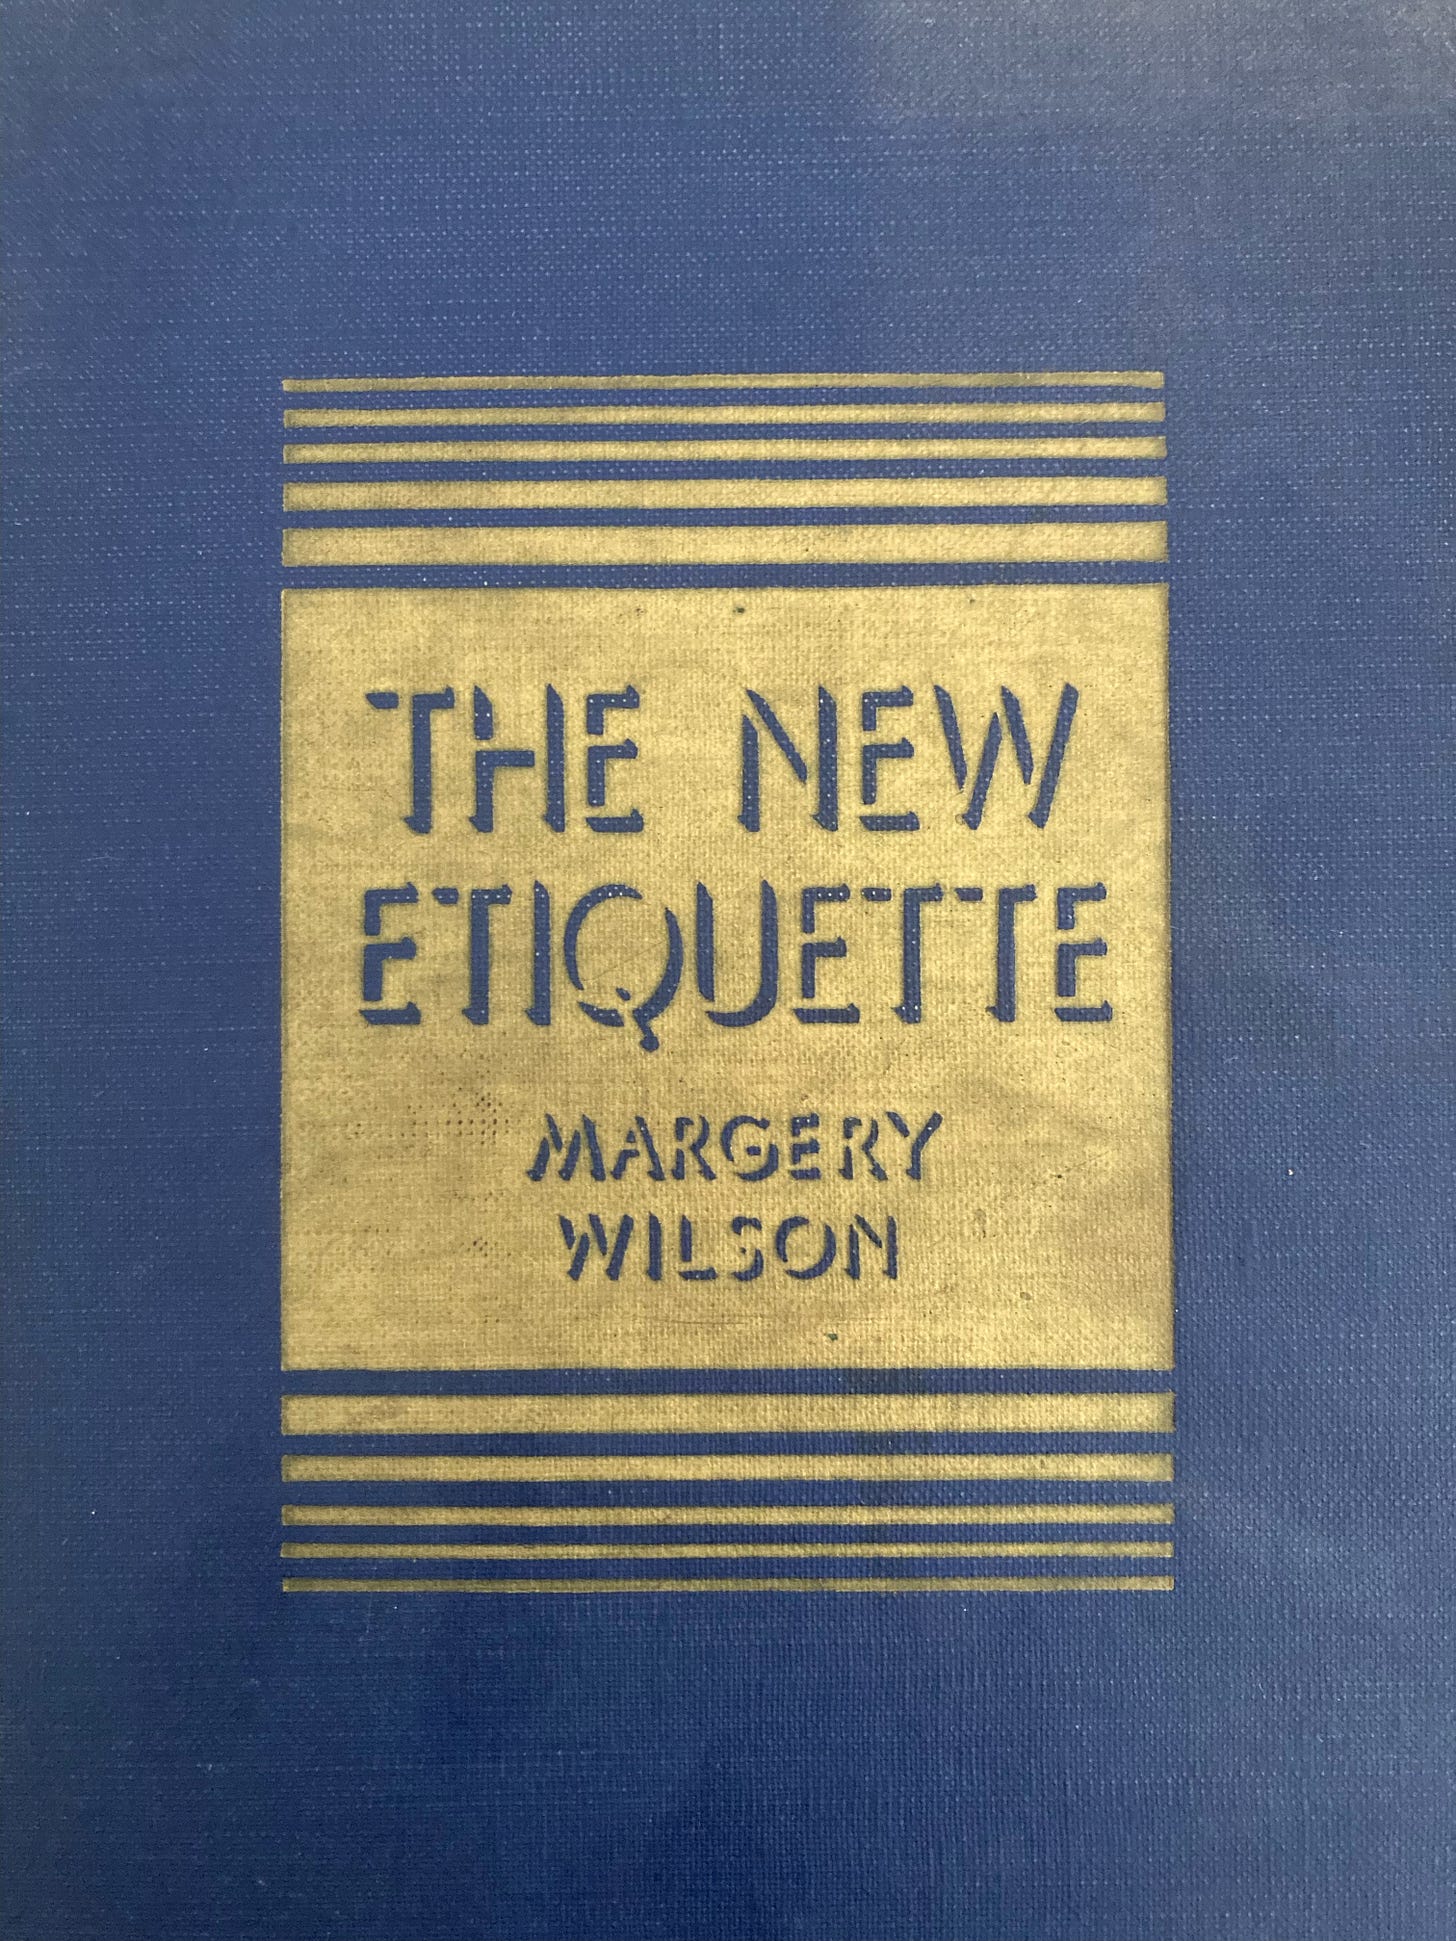 Blue cloth bound book with gold rectangle that has cut out the title and author The New Etiquette Margery Wilson.